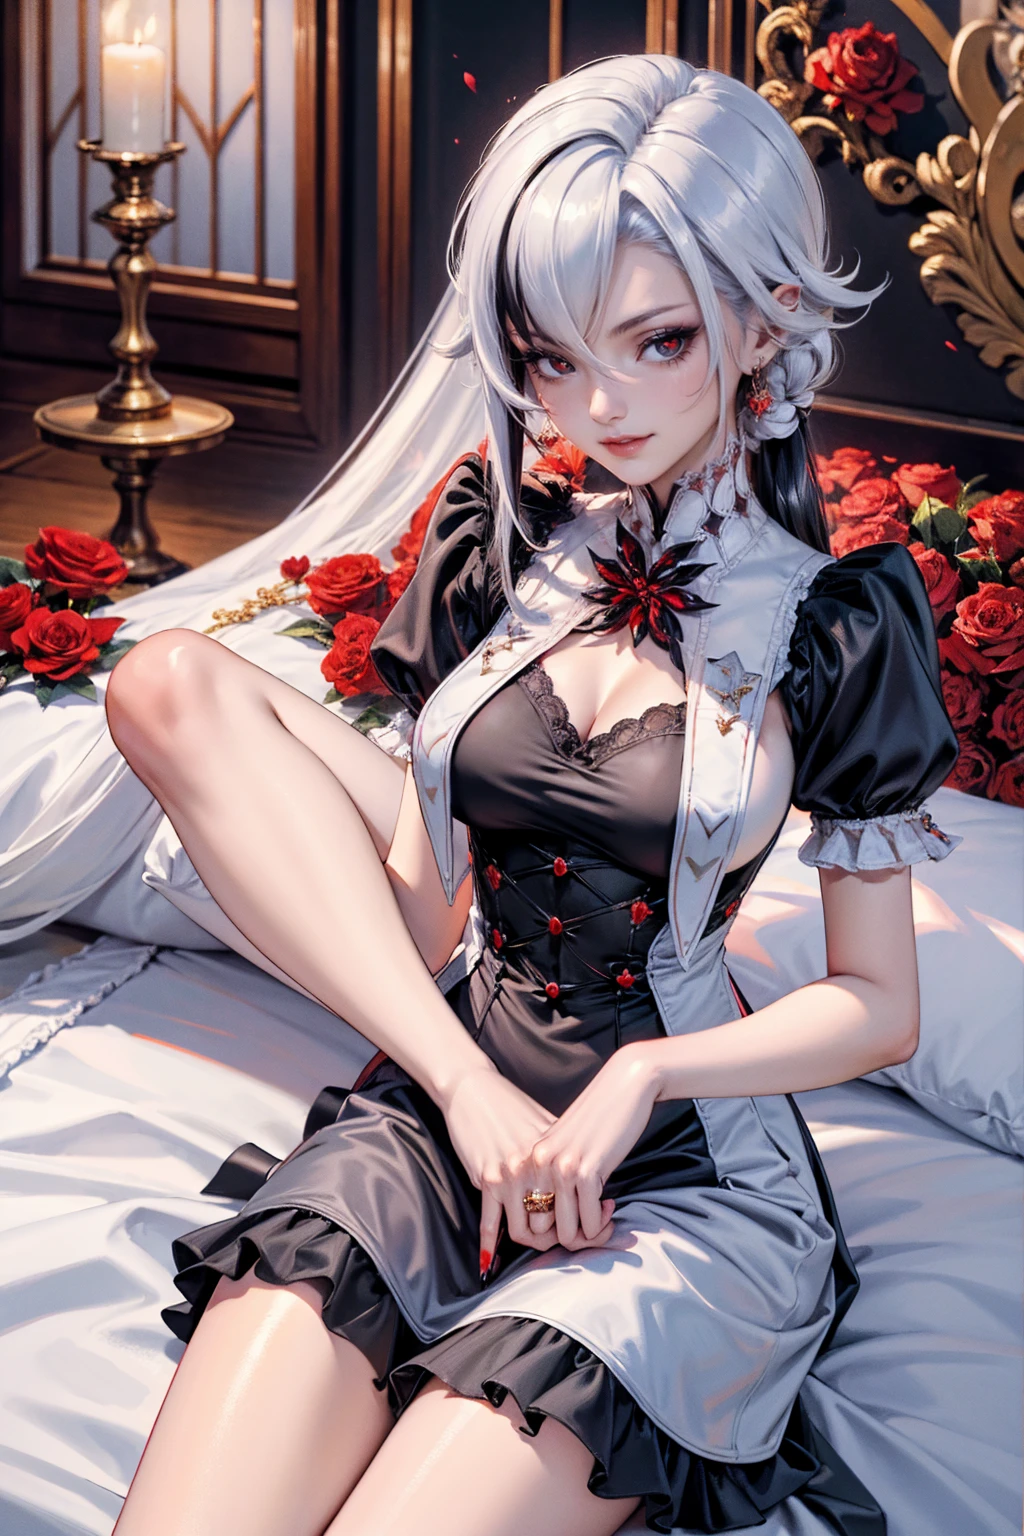 Arlecchino_(genshin impact), red roses, jewelry, ornament hair, roses on her hair, maid, maid dress, maid headdress, maid apron, black hair, white hair, long hair, seat on a bed, gothic style, gothic maid dress, black lantern, white dress, more details on her clothes, golden details, night, smiling, coat,